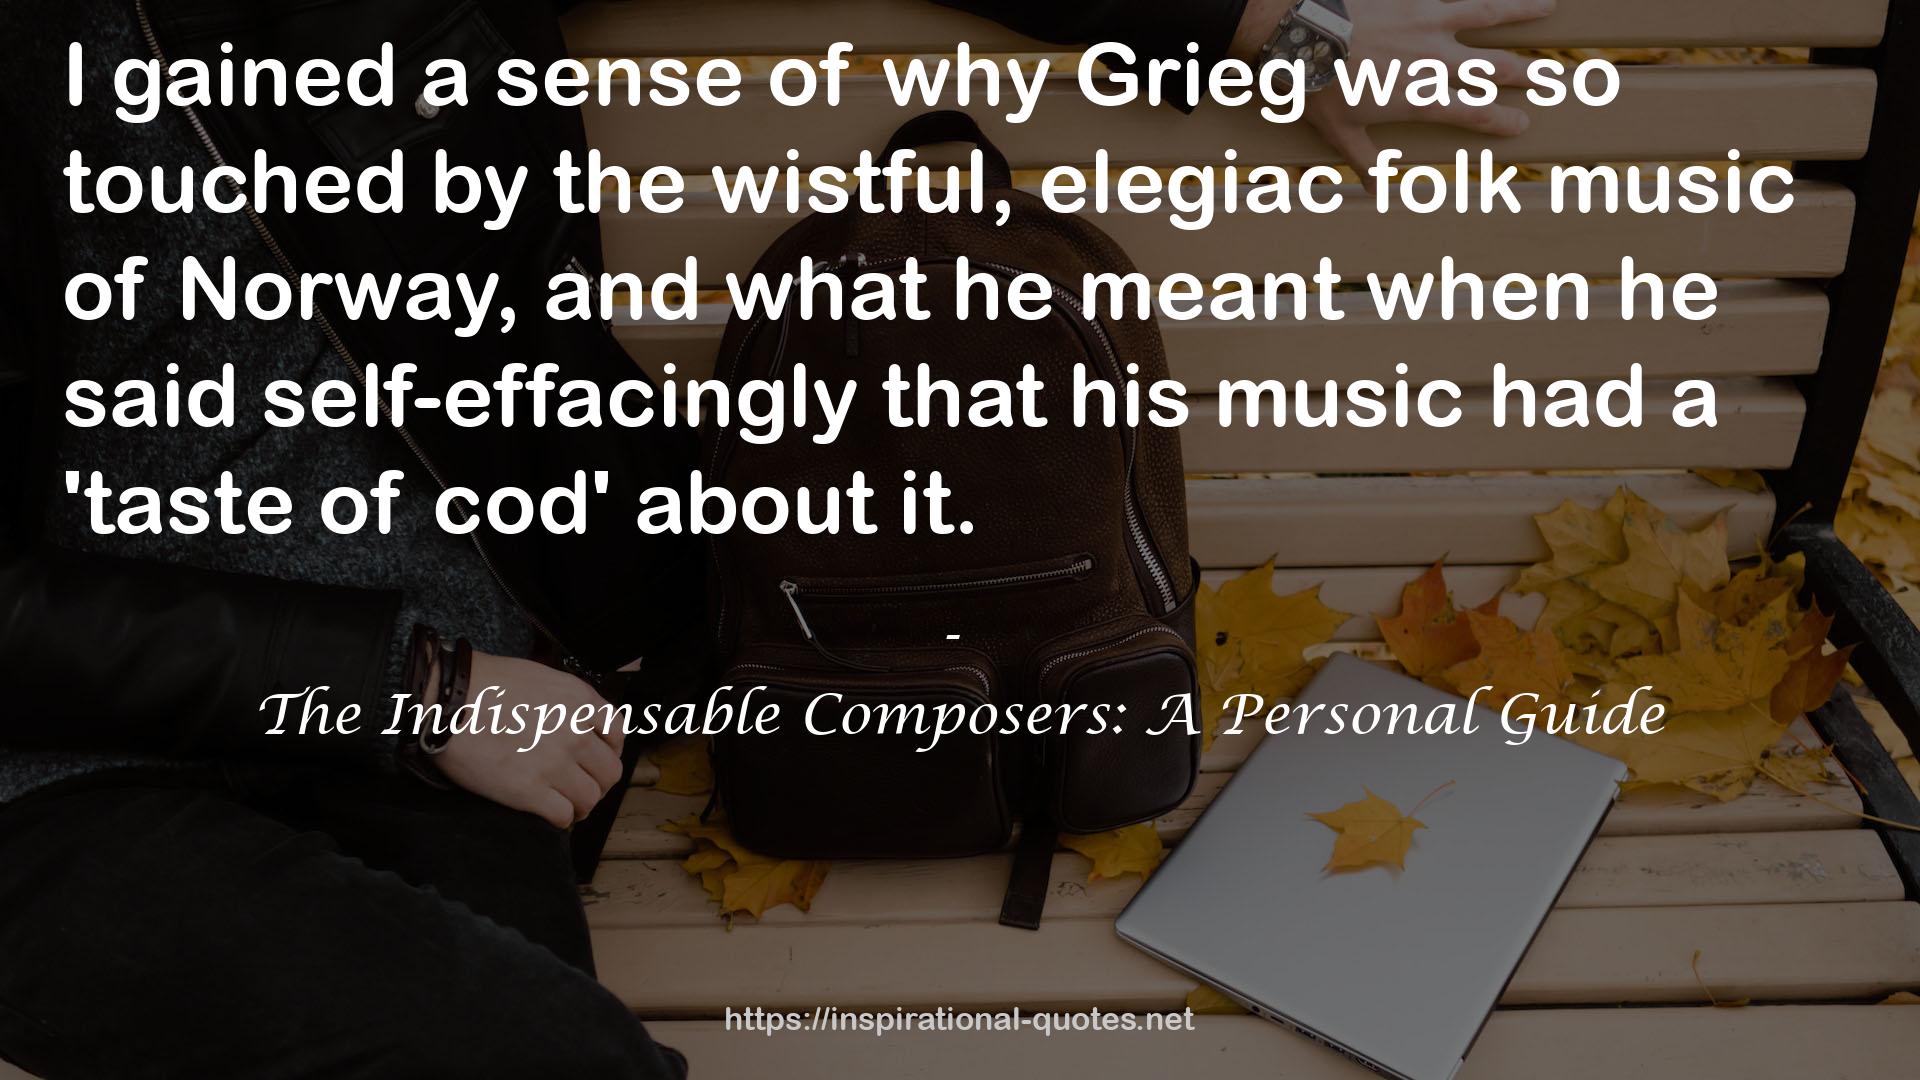 The Indispensable Composers: A Personal Guide QUOTES